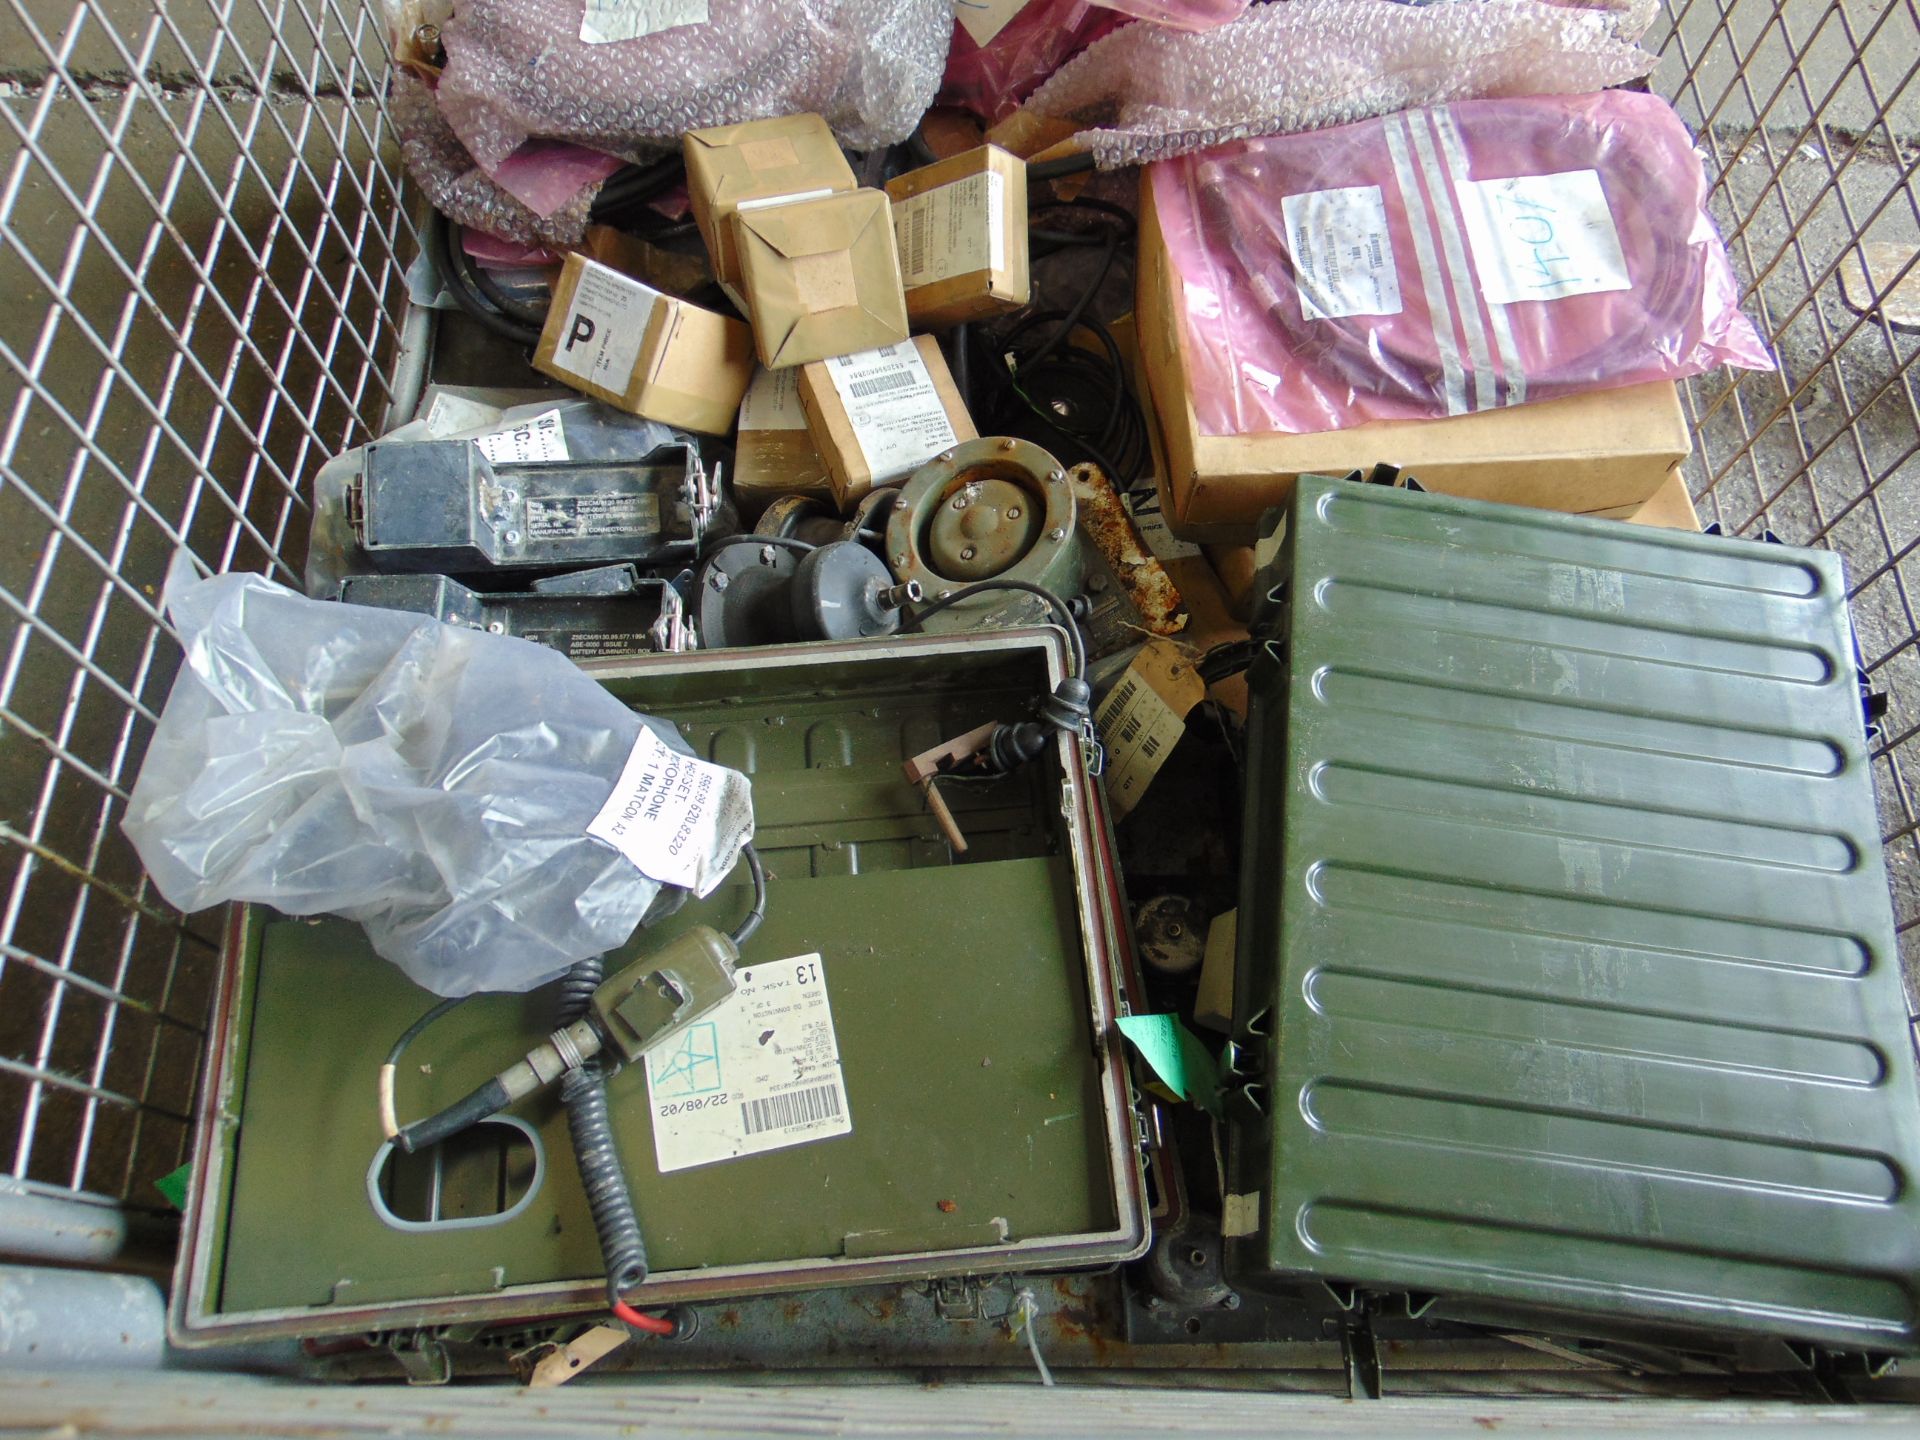 1x Stillage of Clansman Radio Equipment in Cables, Bases, Spares Etc